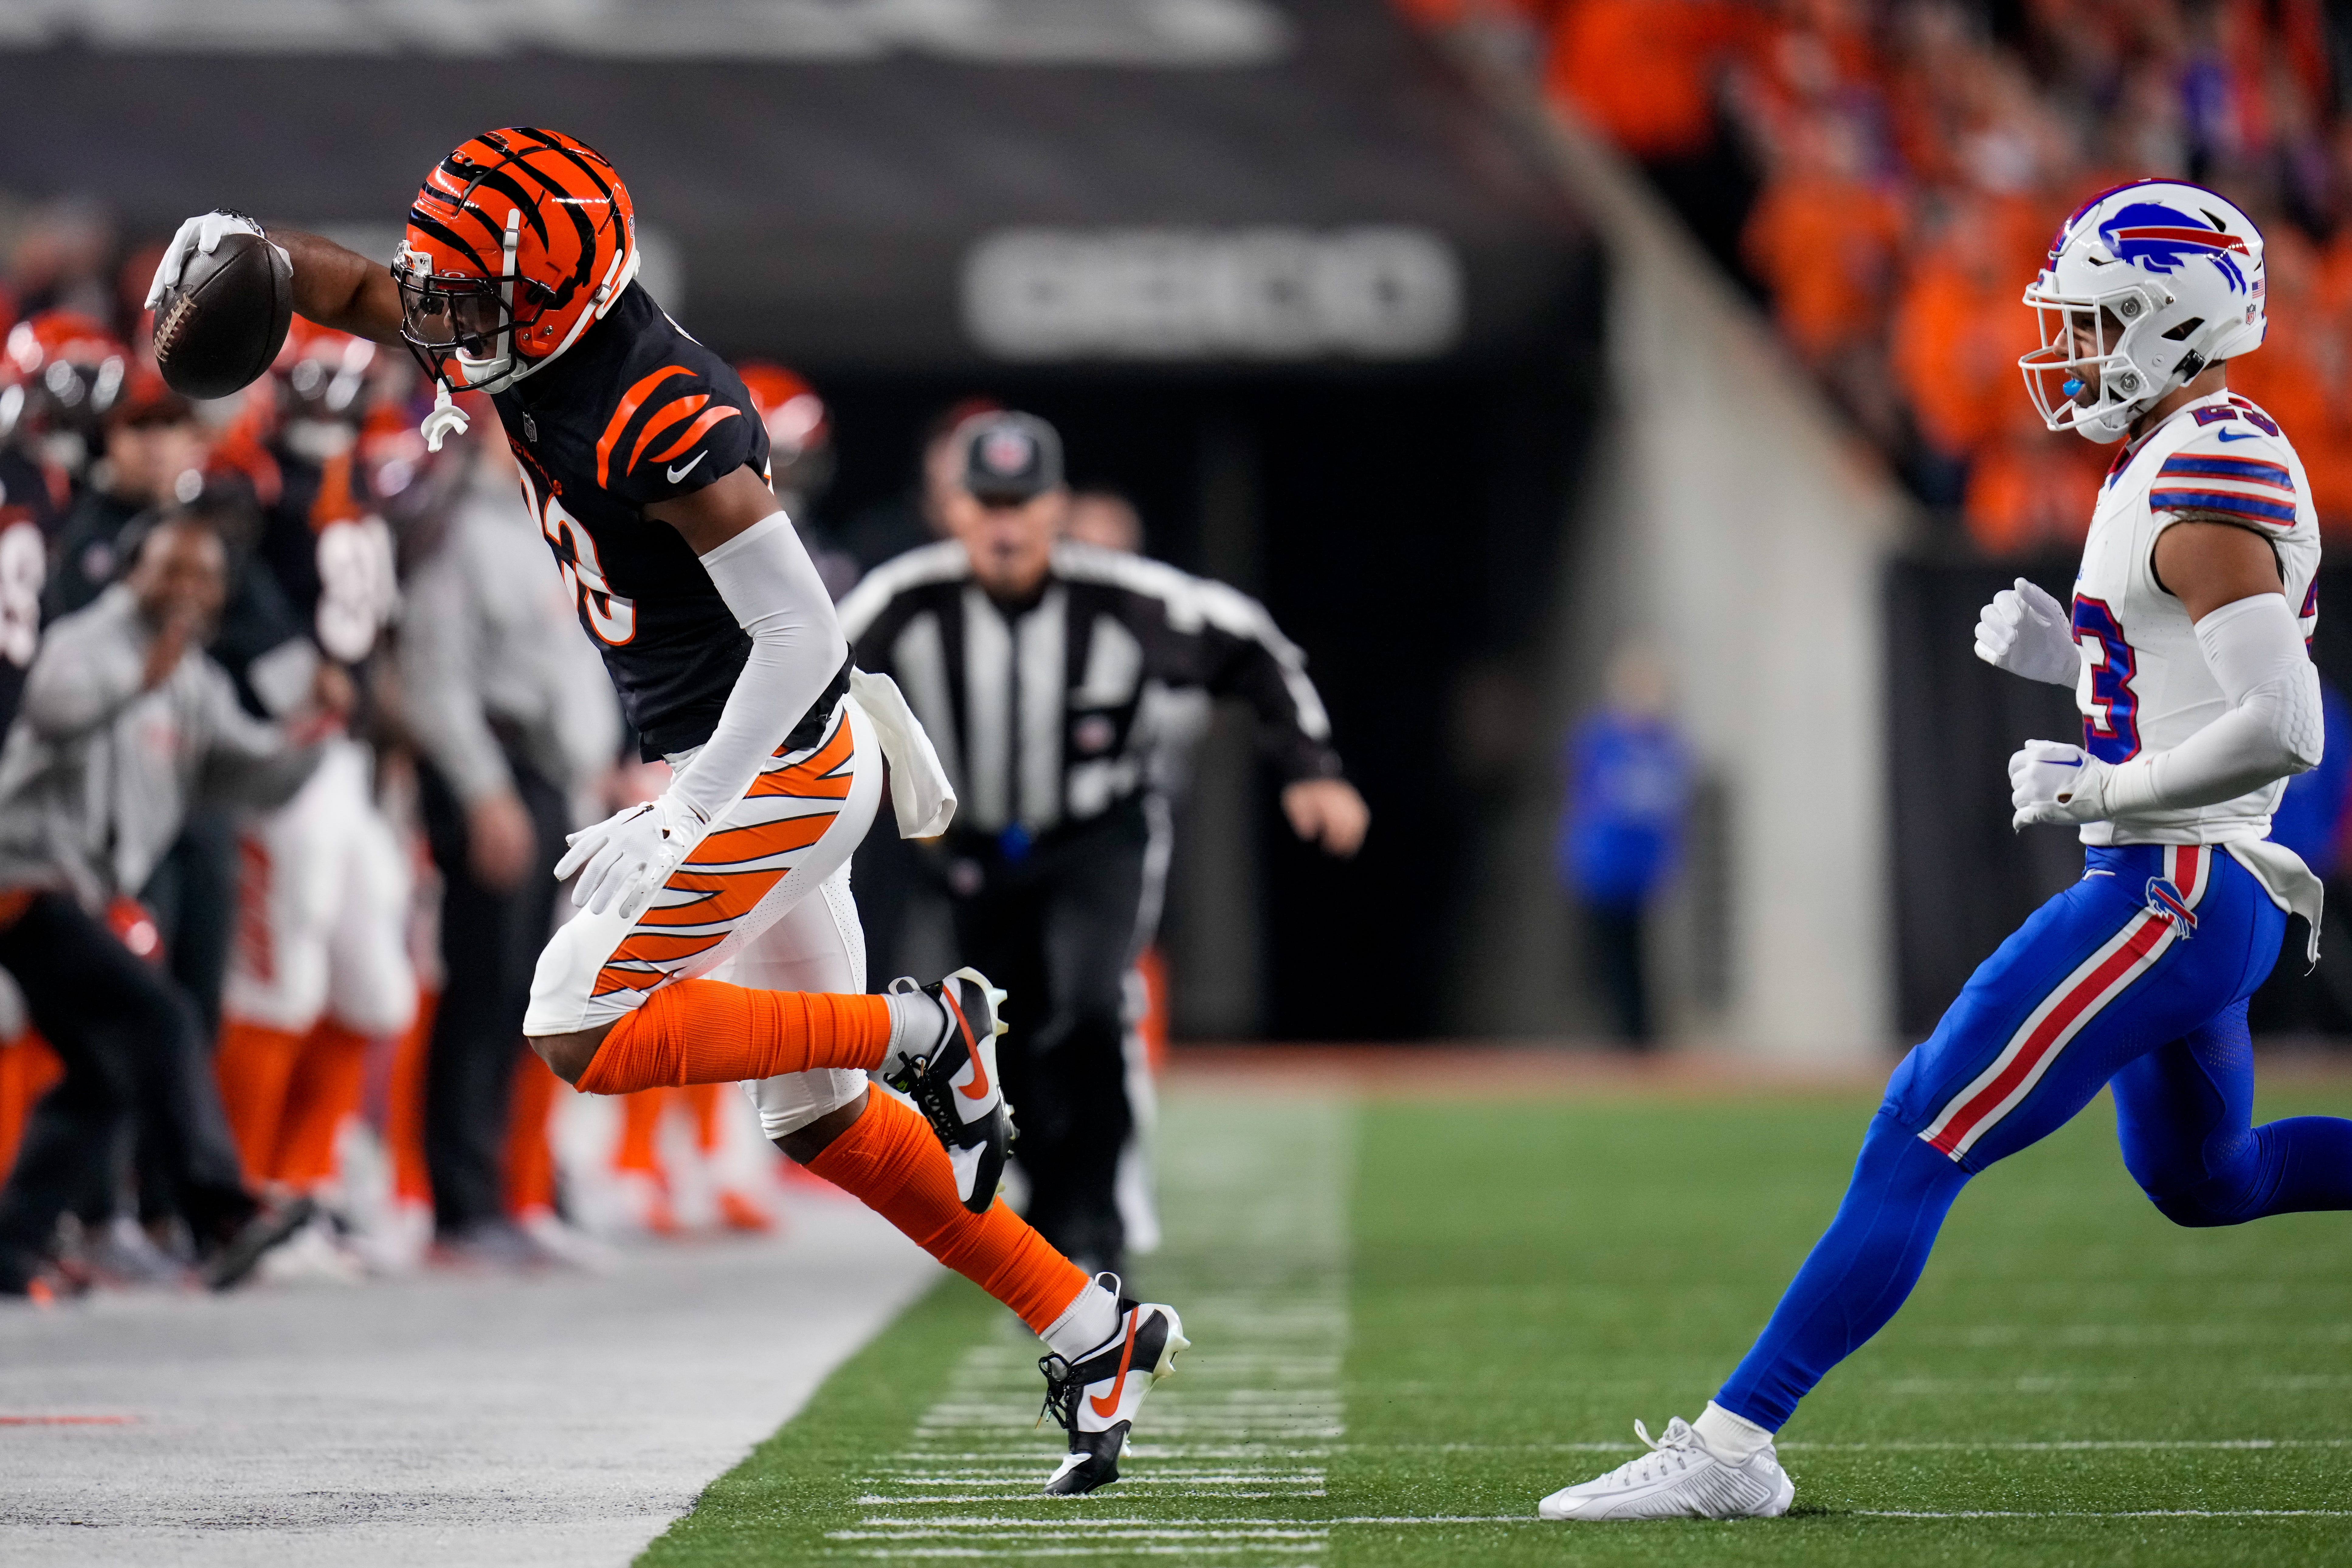 Cincinnati Bengals wide receiver Tyler Boyd (83) catches a pass in the first quarter of the NFL Week 9 game between the Cincinnati Bengals and the Buffalo Bills at Paycor Stadium in Cincinnati on Sunday, Nov. 5, 2023.